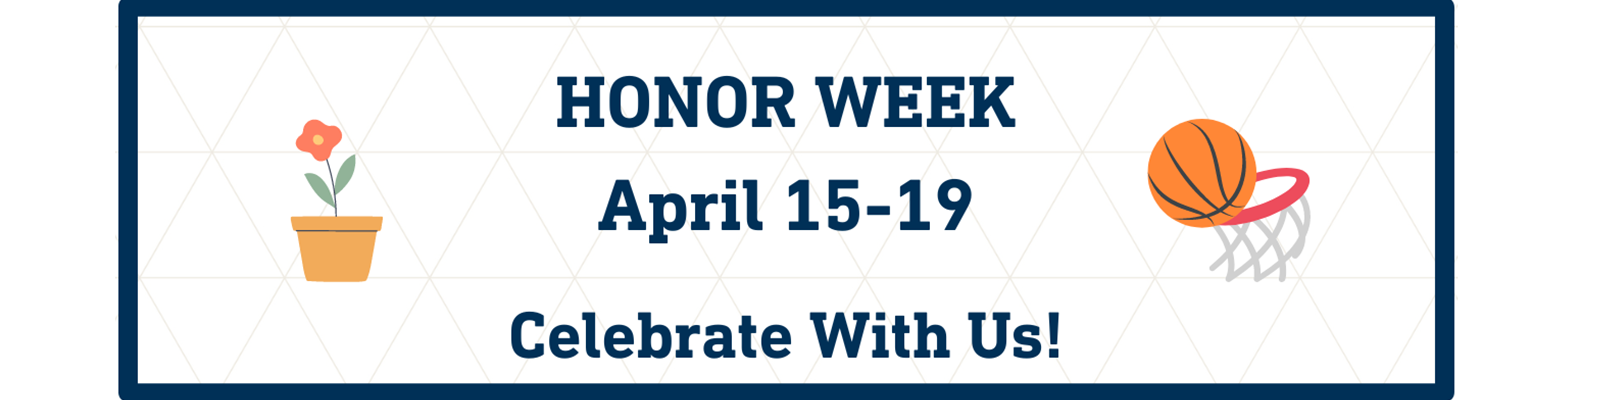 Honor Week April 15-19 Celebrate with us!